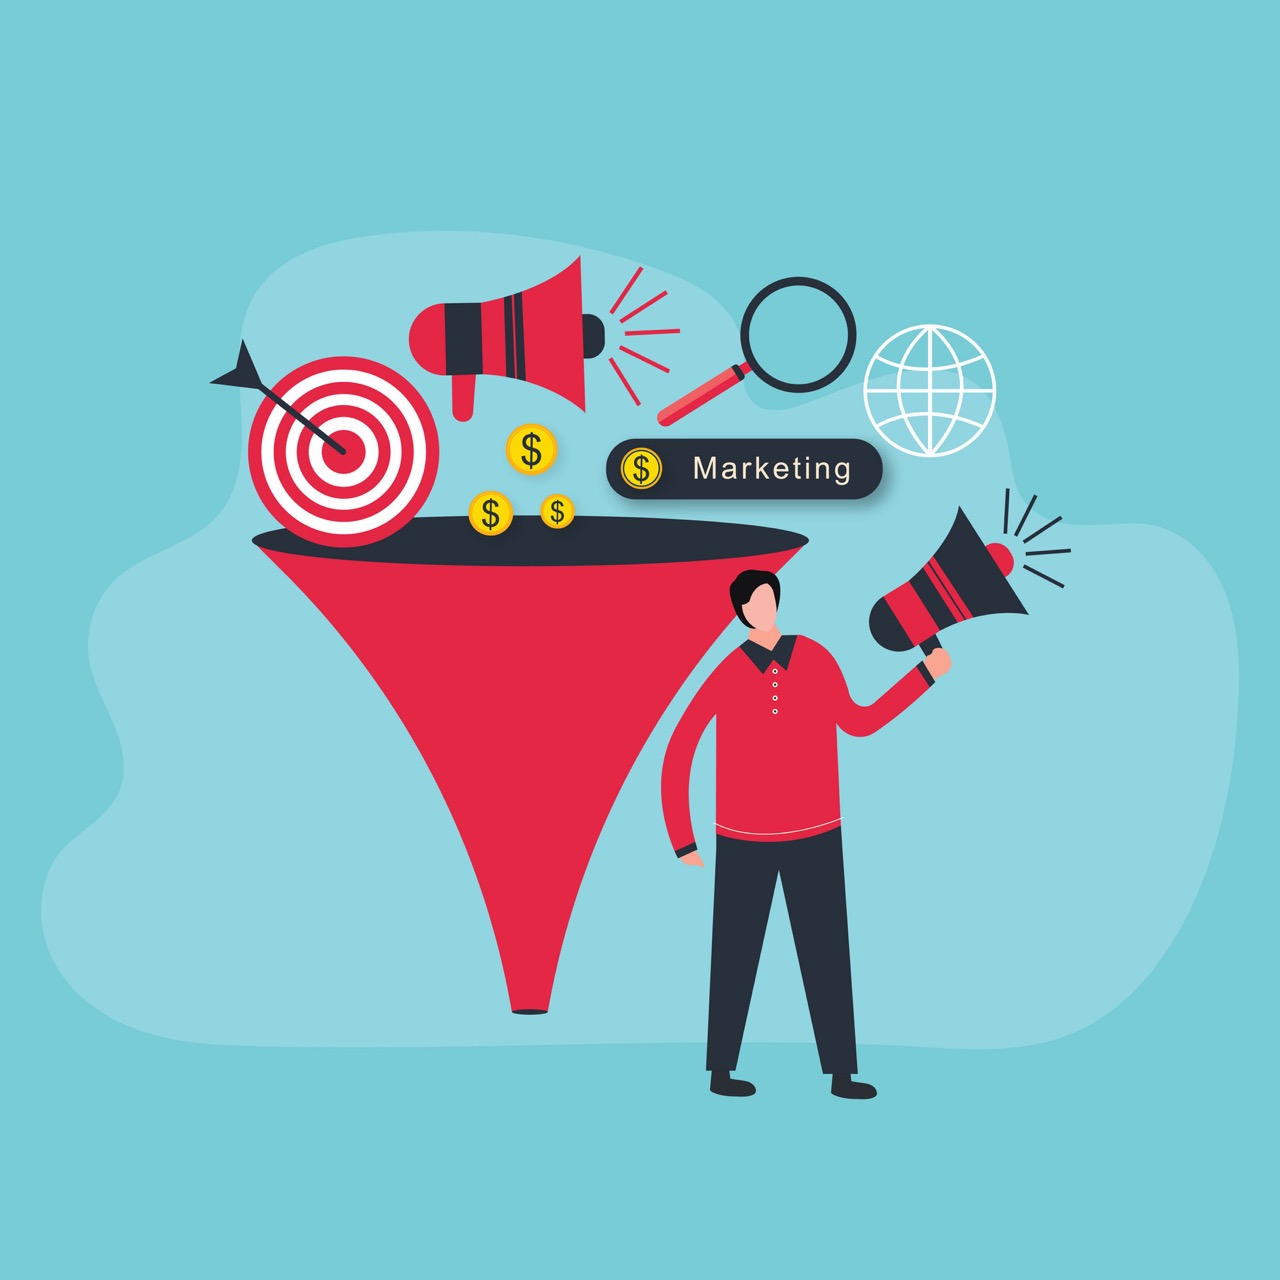 Sales funnel and lead generation. Marketing strategy